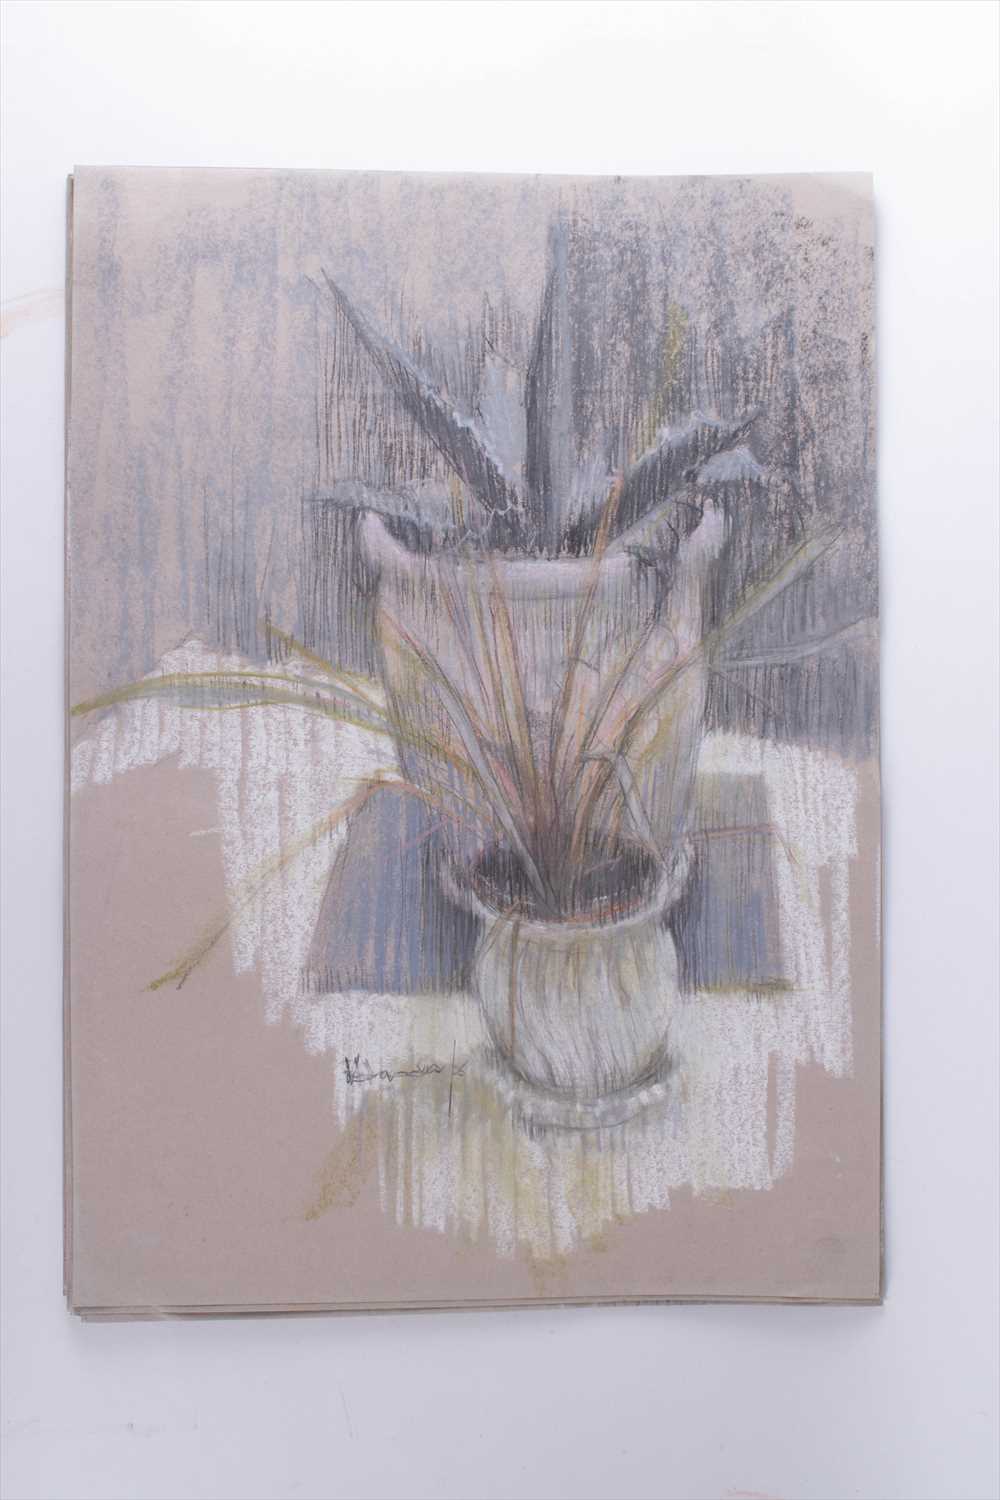 Val Hamer (20th-21st century) Britisha collection of still life and floral studies, pastel on paper, - Image 8 of 20